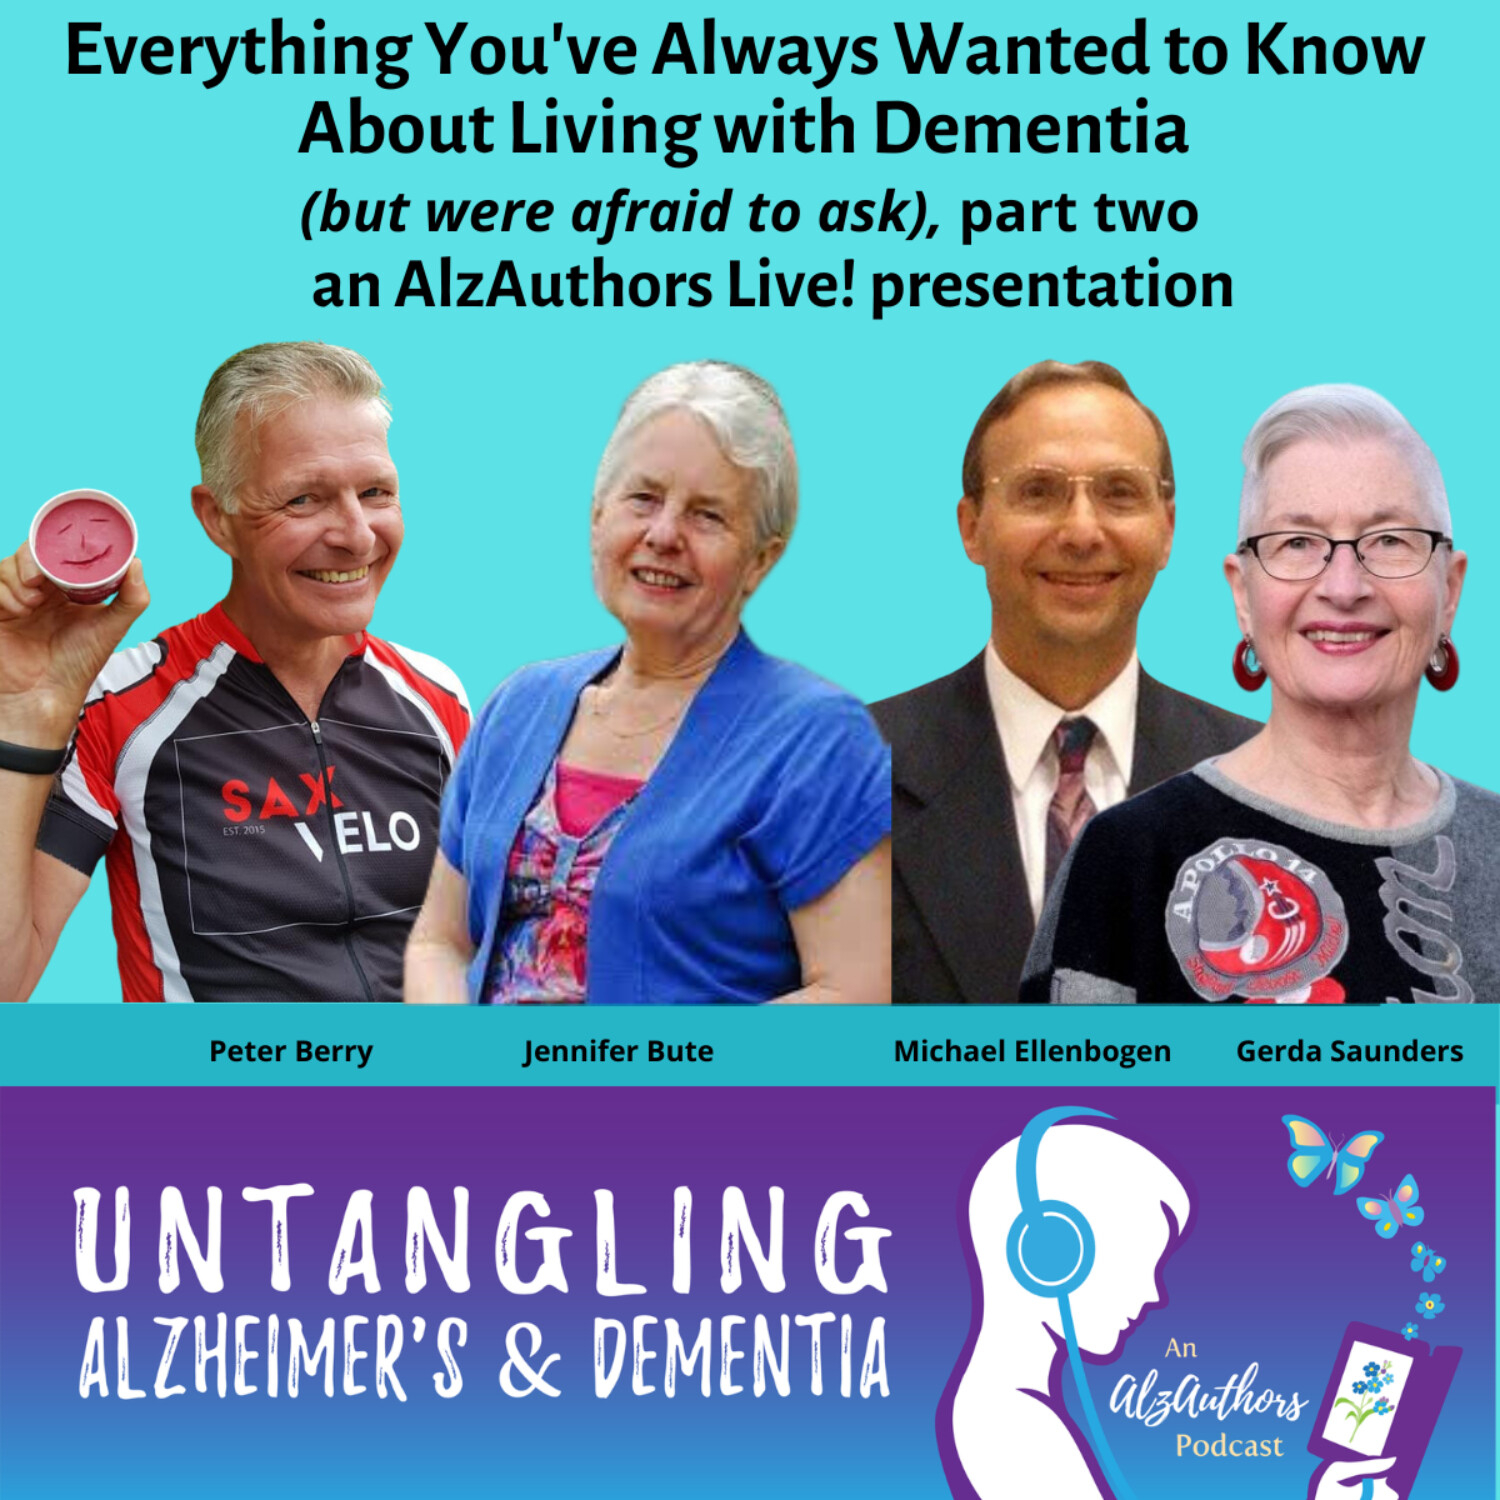 Everything You’ve Always Wanted to Know About Living WIth Dementia, part 2